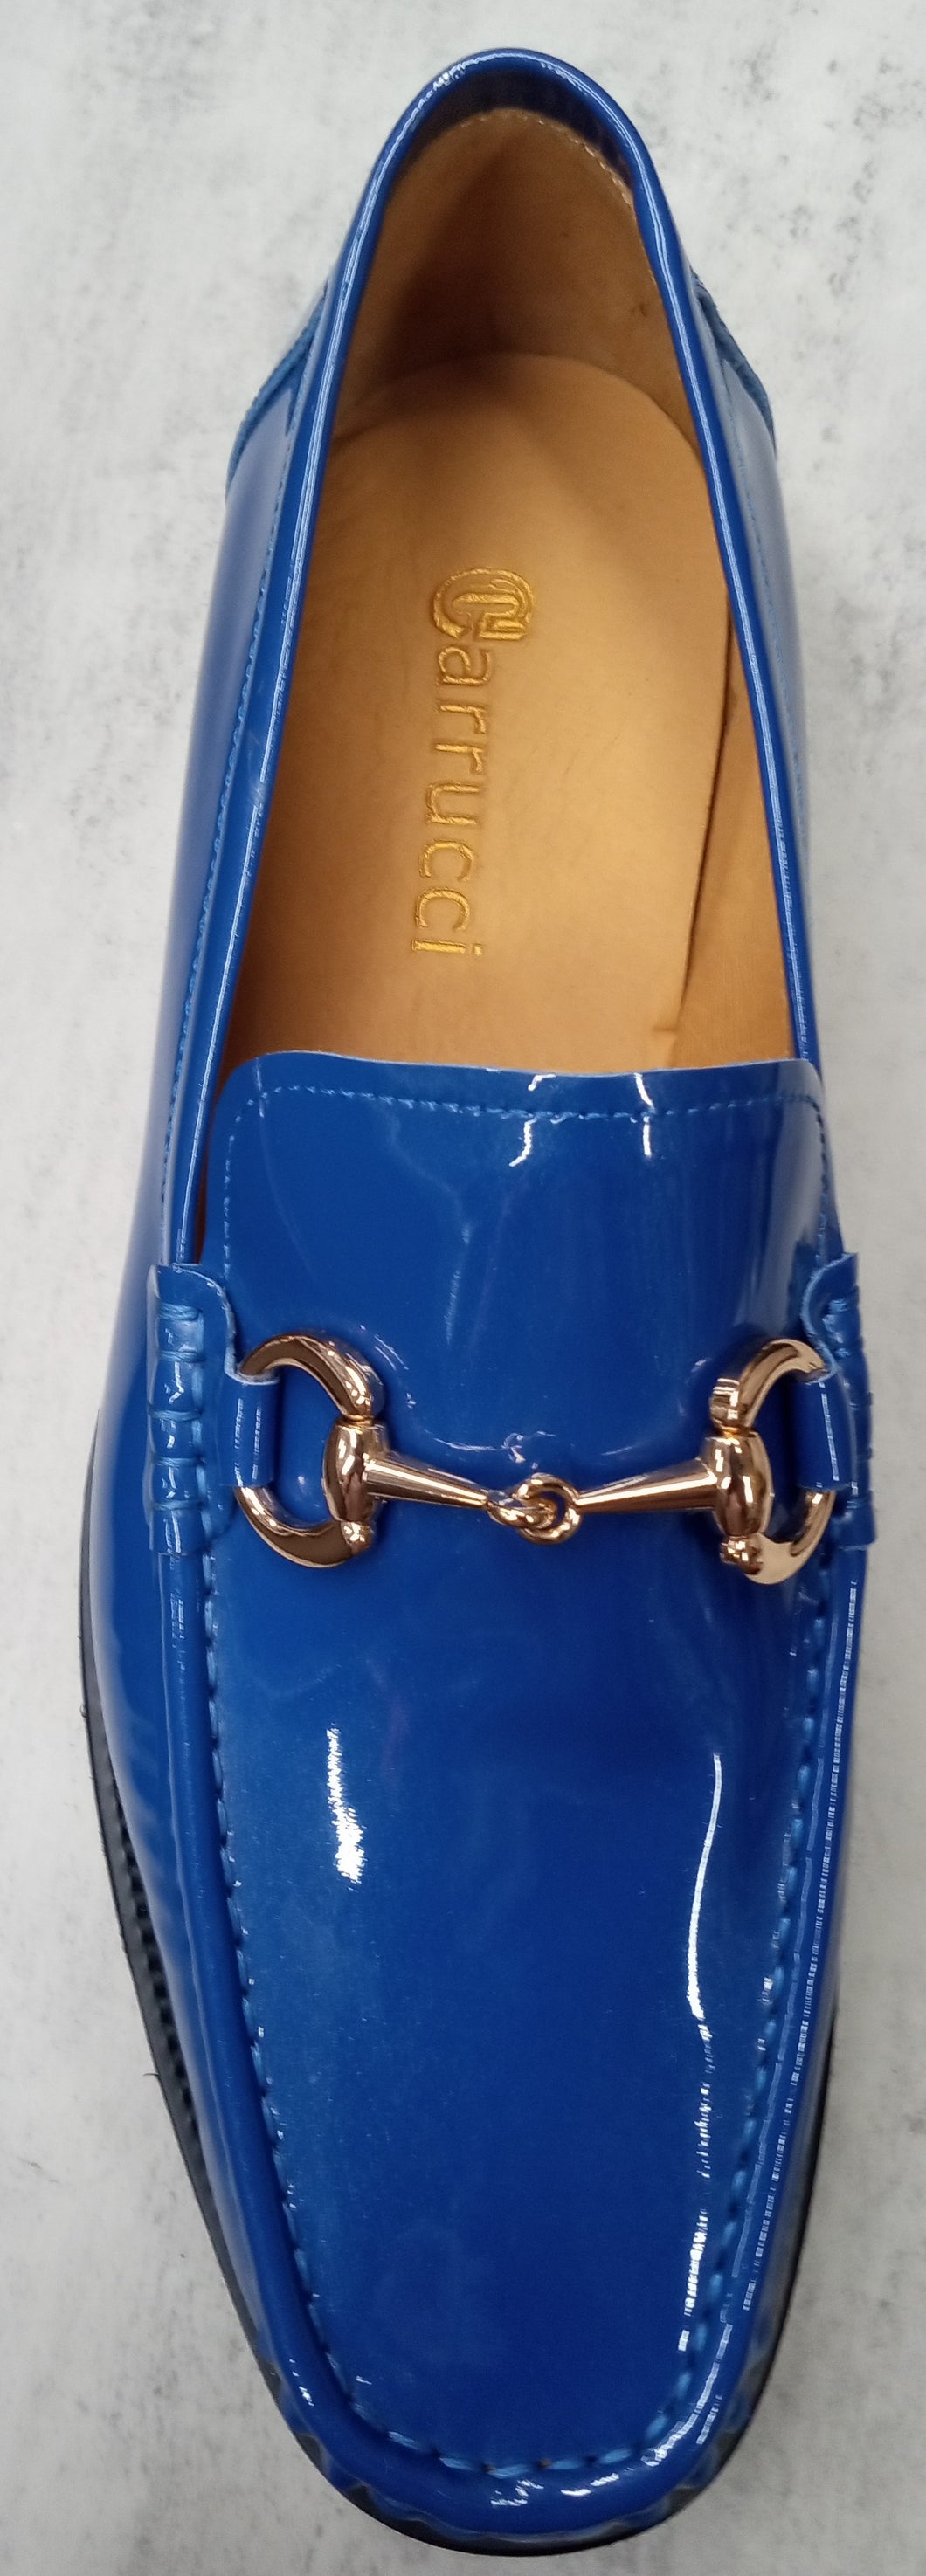 Carrucci  Patent Leather Loafer